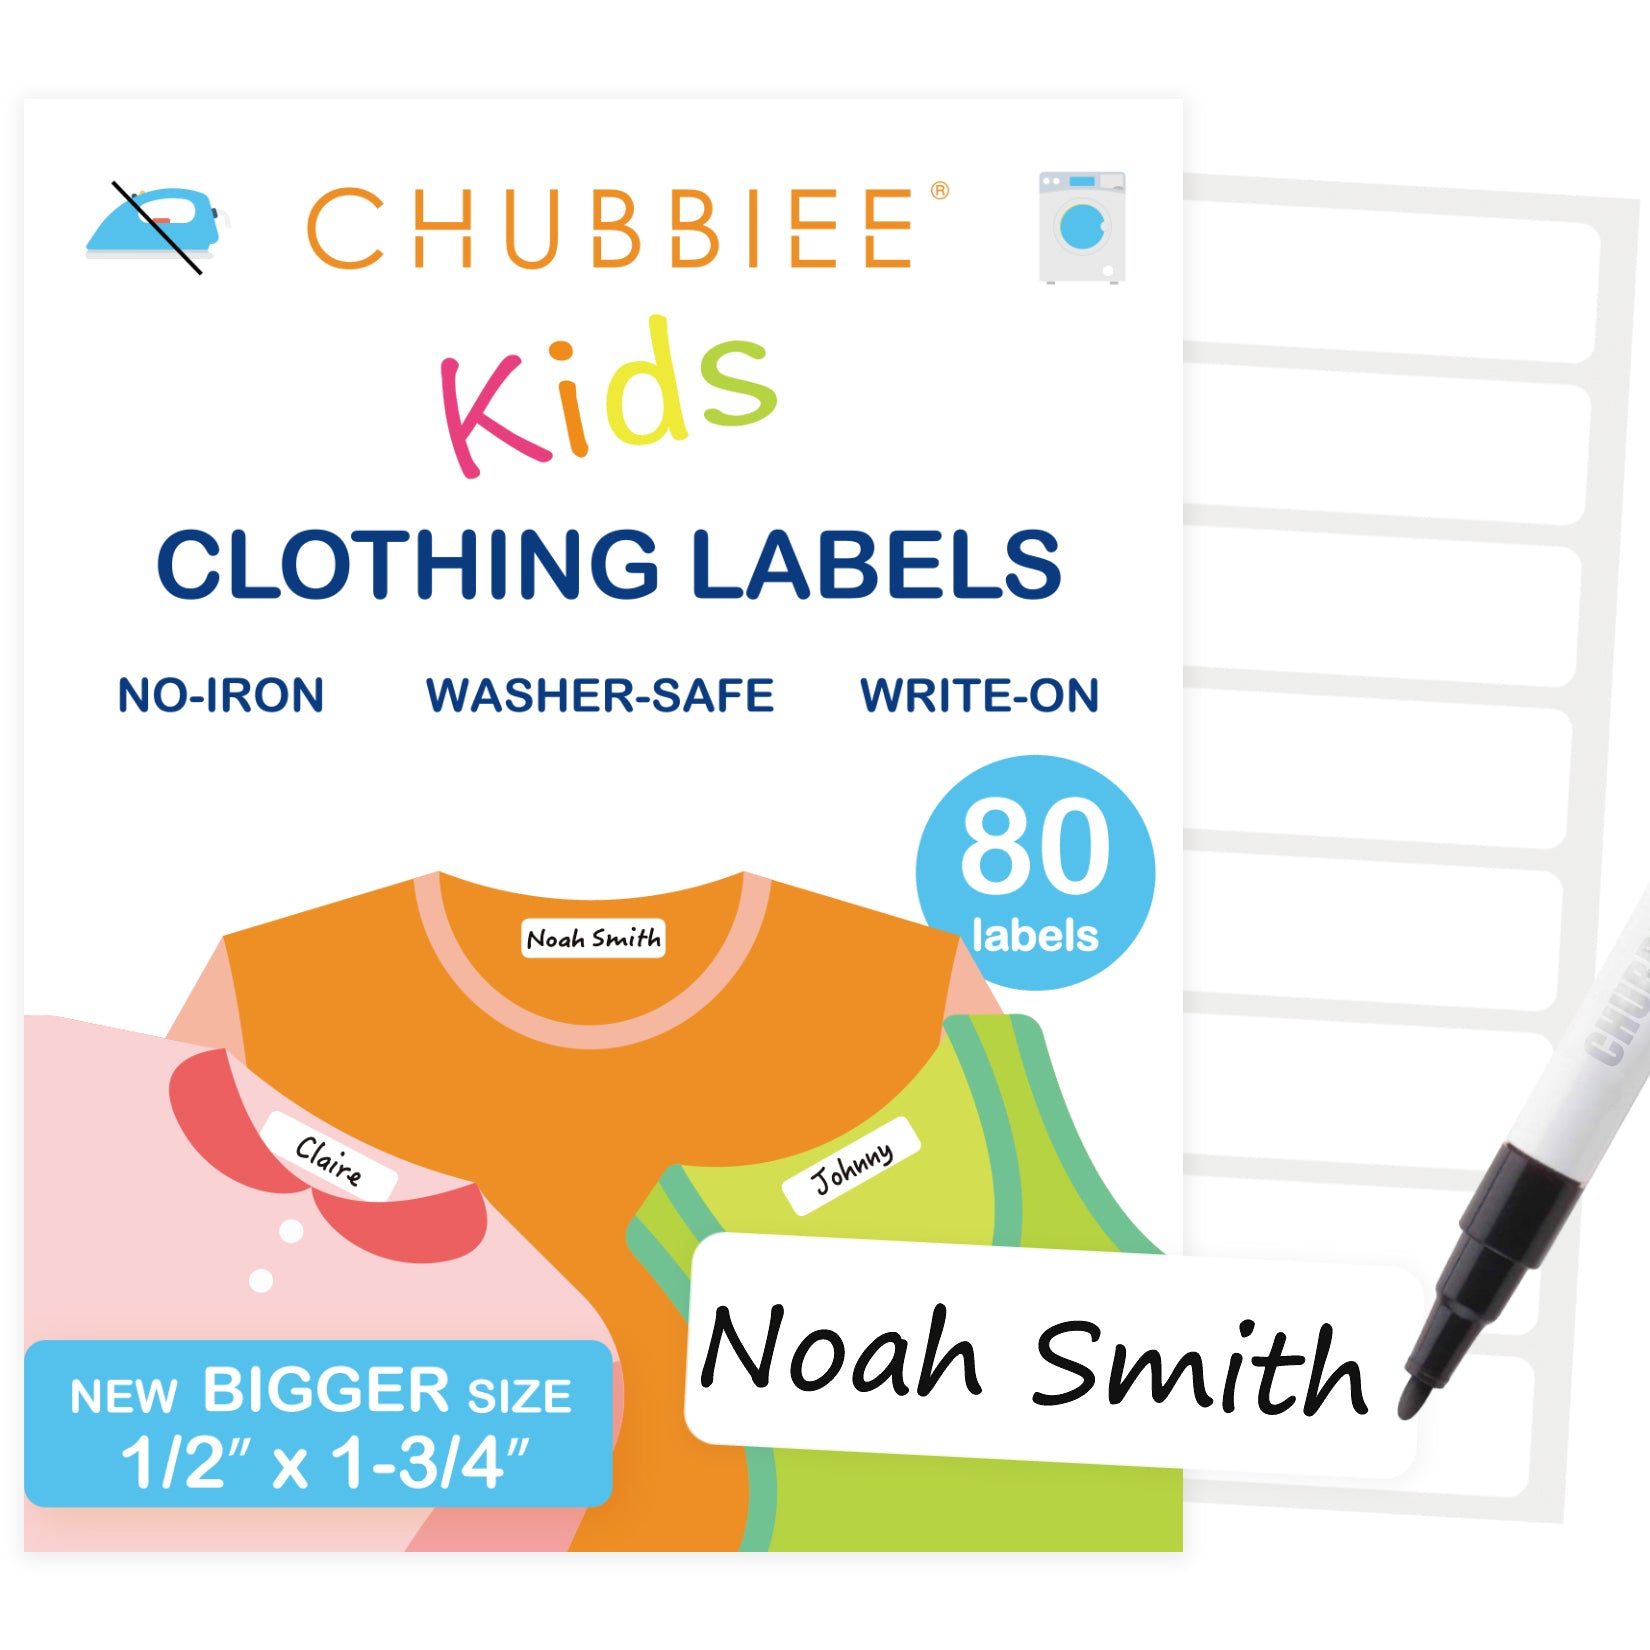 96 Clothing Labels Self-Stick No-Iron Write-On, Writable Fabric Labels, Washer & Dryer Safe, Great for Children & Adults, School, Camp, Nursing Home